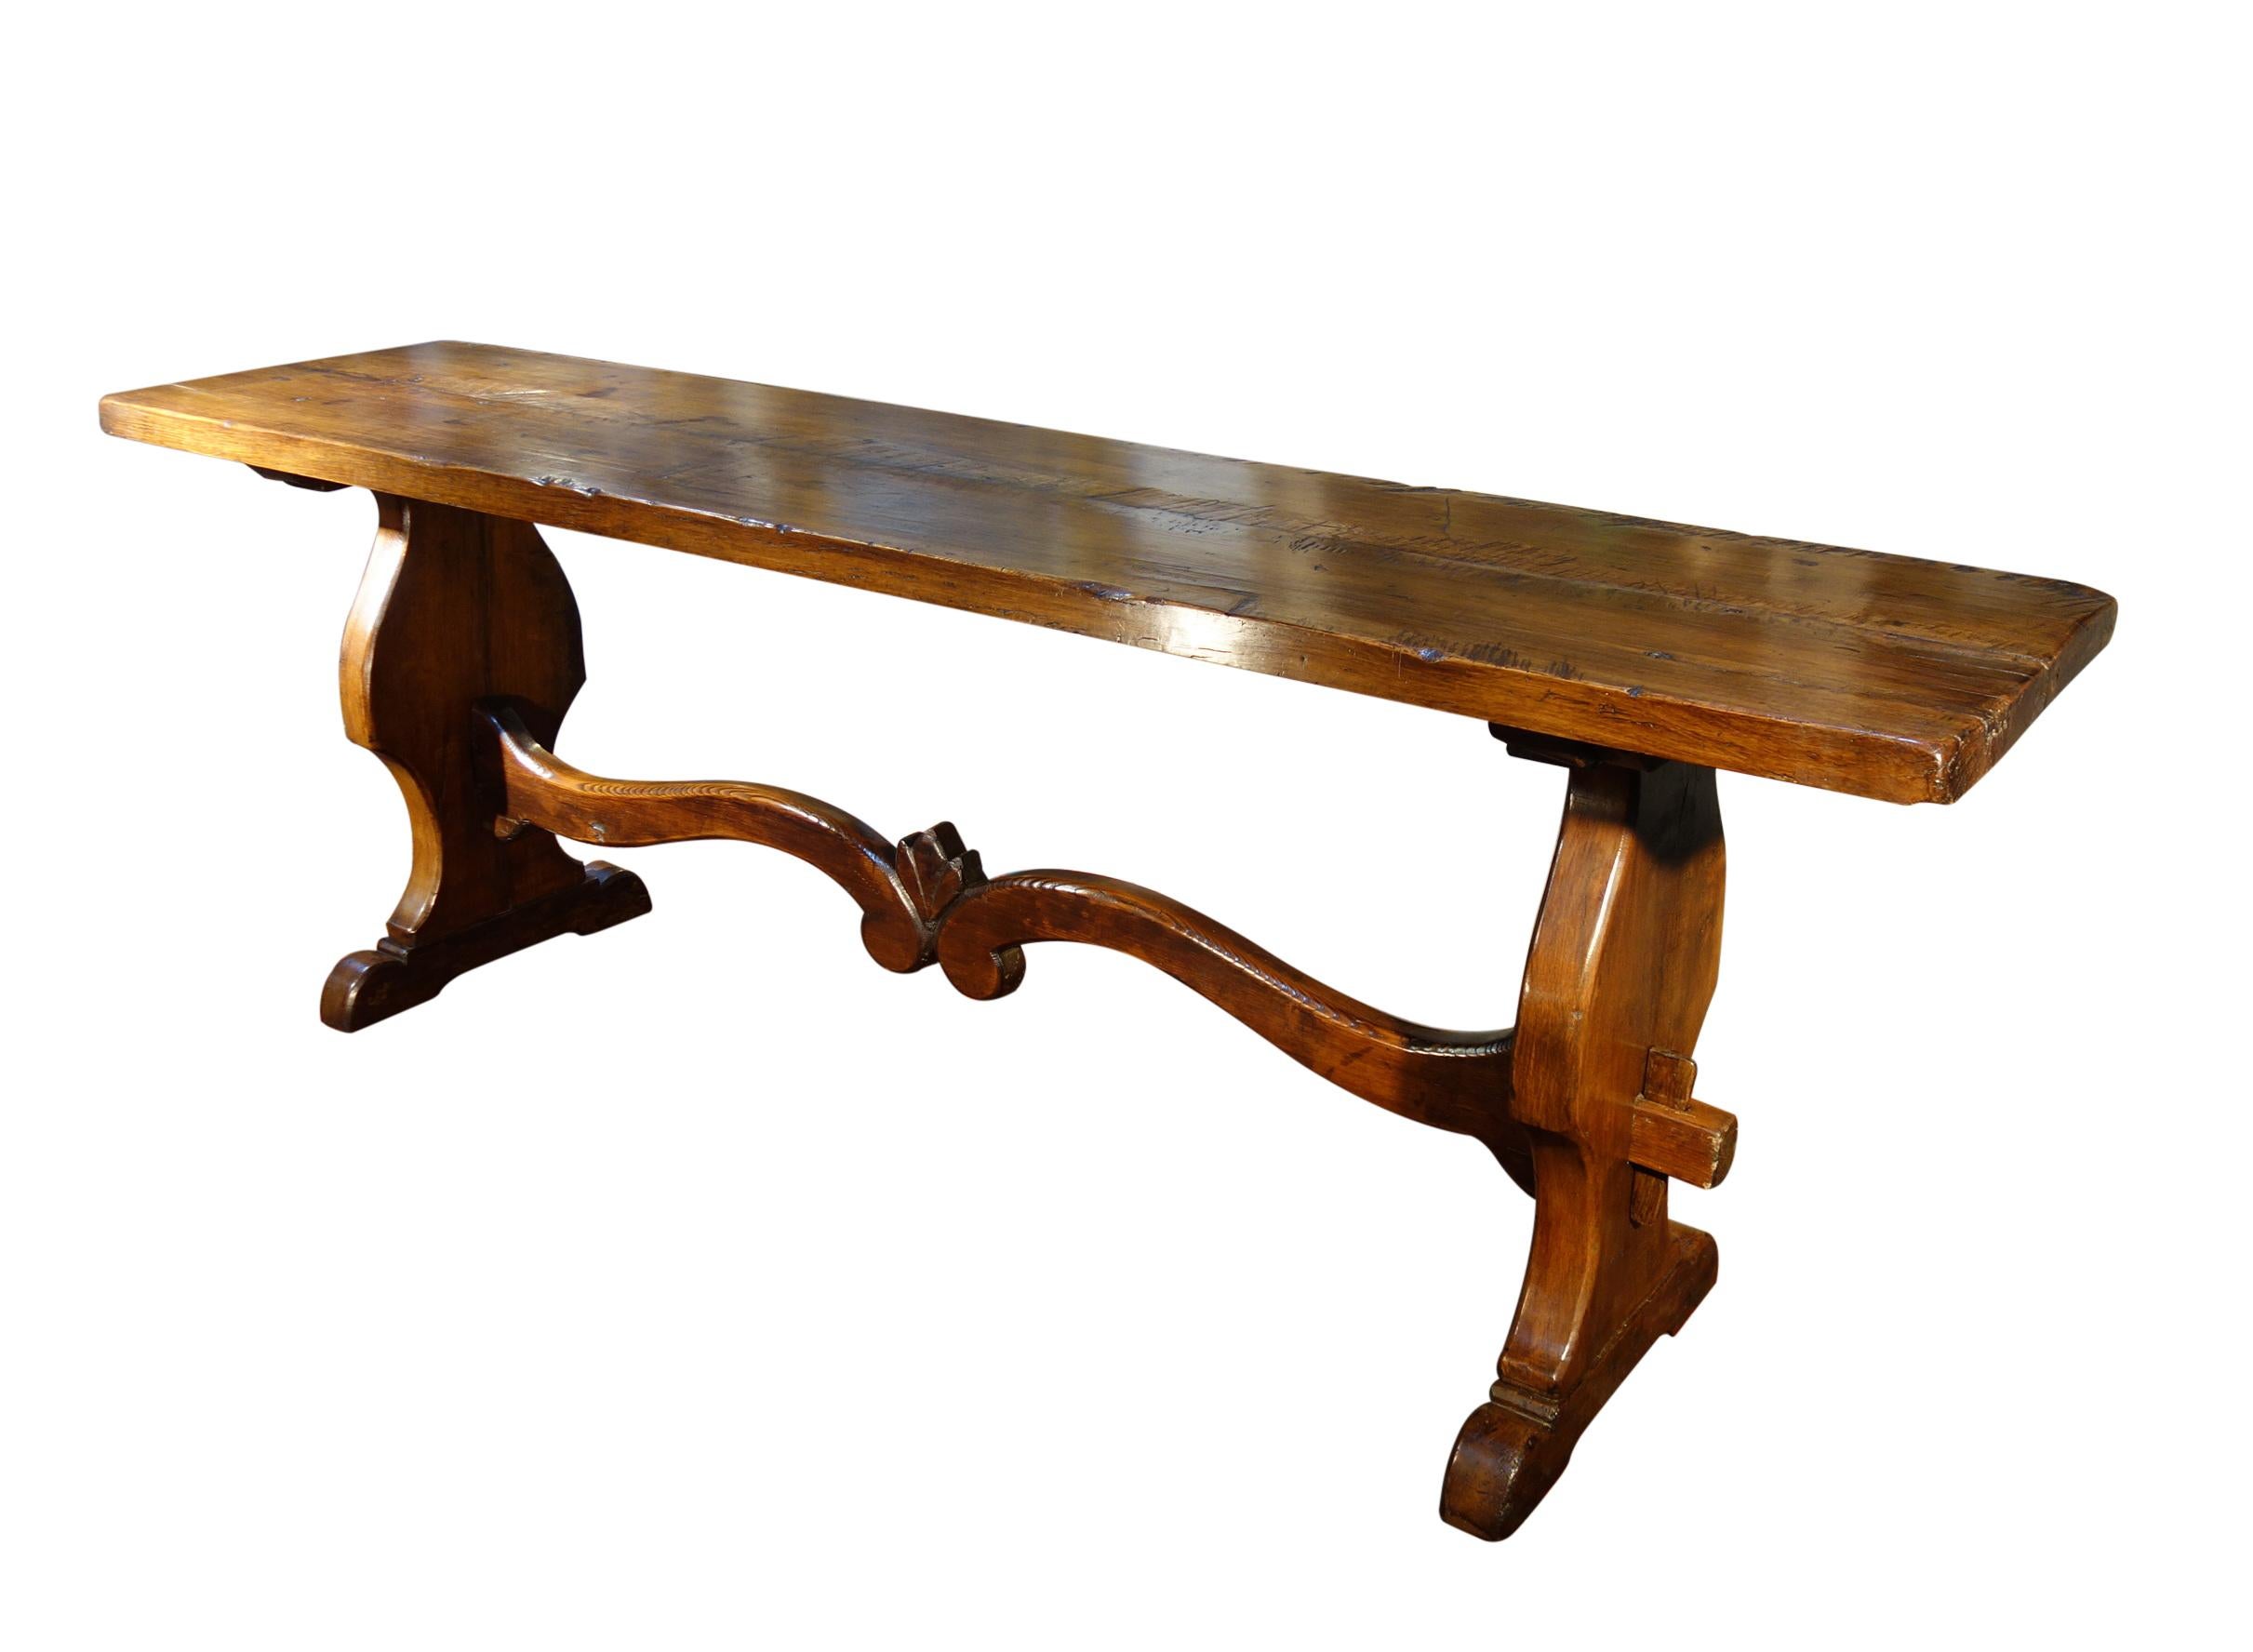 THIS ANTIQUE TABLE HAS SOLD, INQUIRE FOR A CUSTOM ORDER

COPPE - Tuscan Trestle Table, Old World Style for Modern Living. This majestic antique Italian trestle style table with solid Italian Walnut 2-slab top and carved chalice-shaped bases with